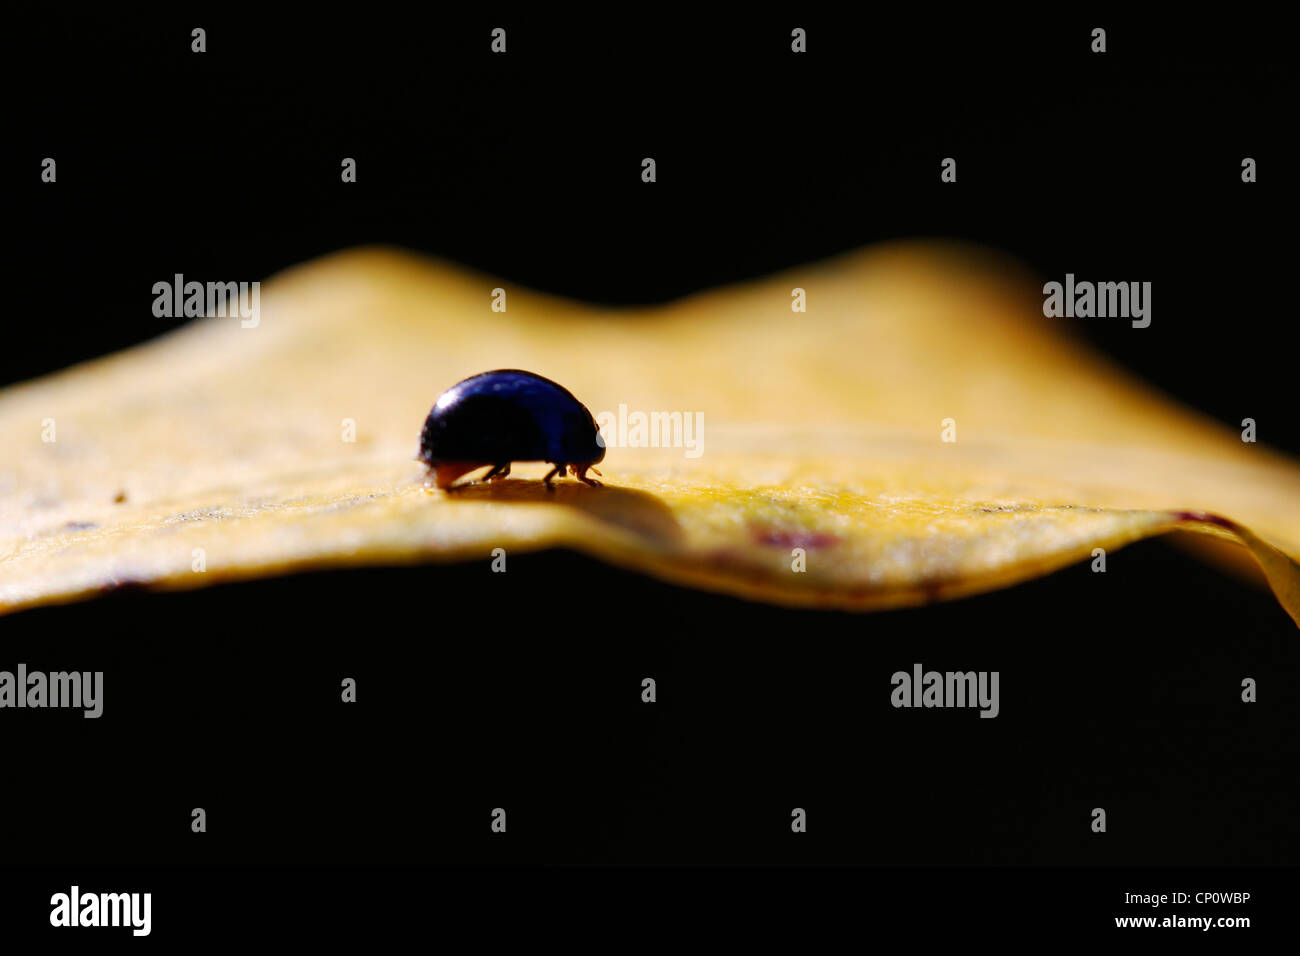 A beetle on a yellow leaf. Stock Photo